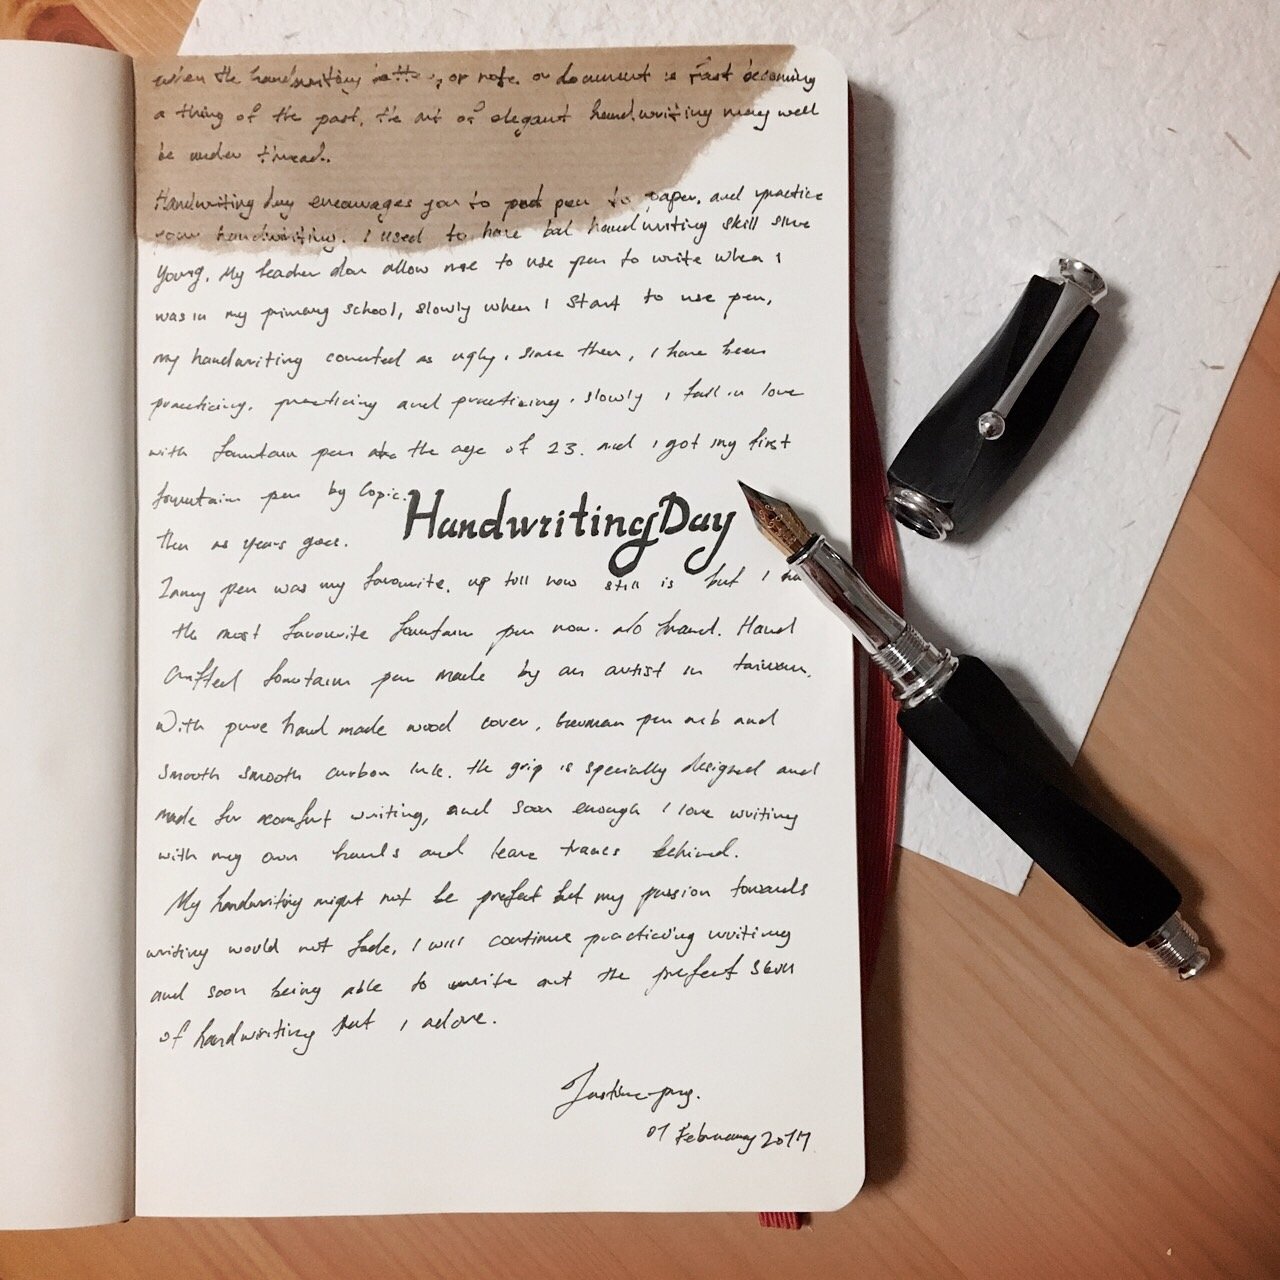 My Confession to Handwriting